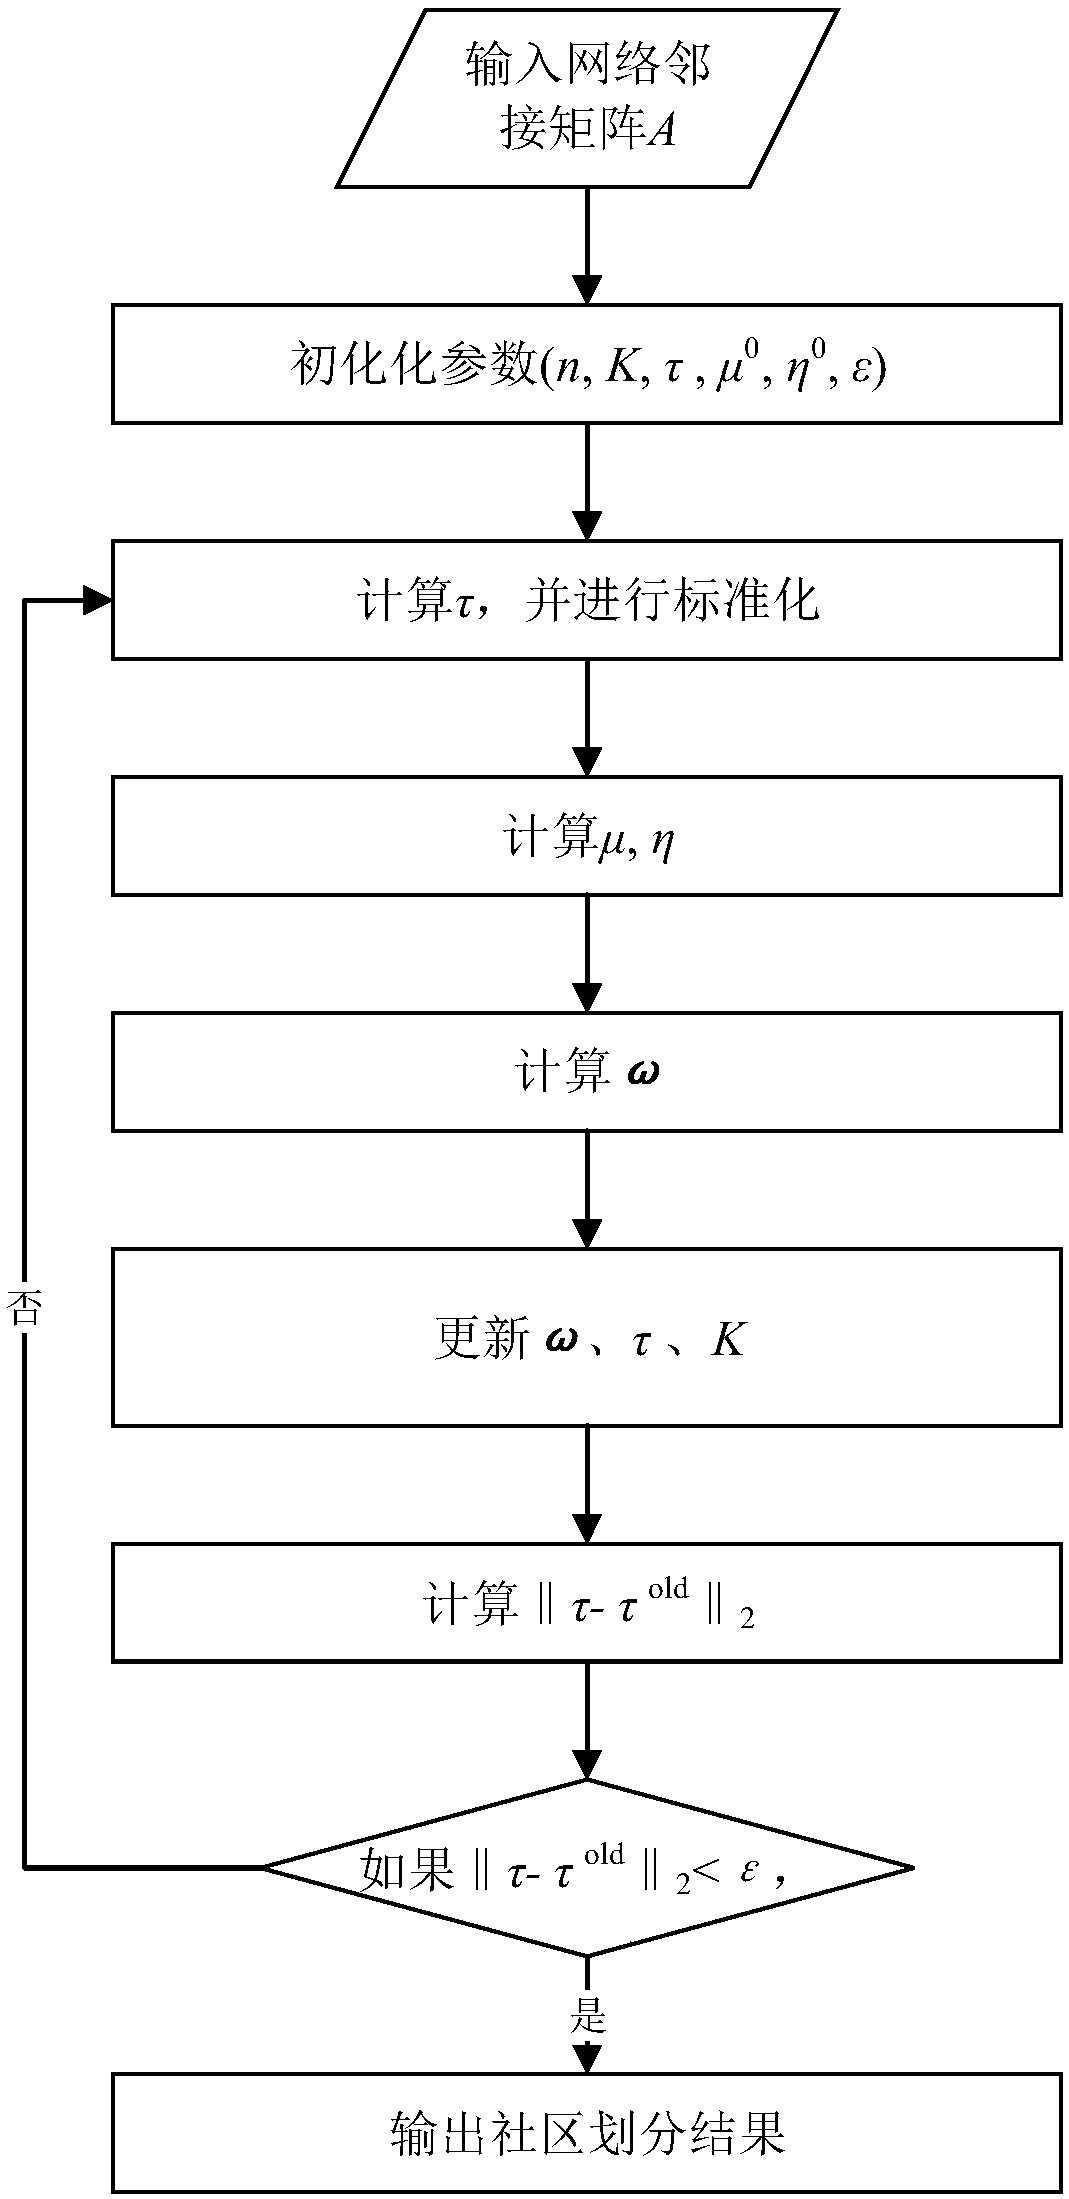 Fast symbol community discovery system and algorithm for automatically determining number of communities